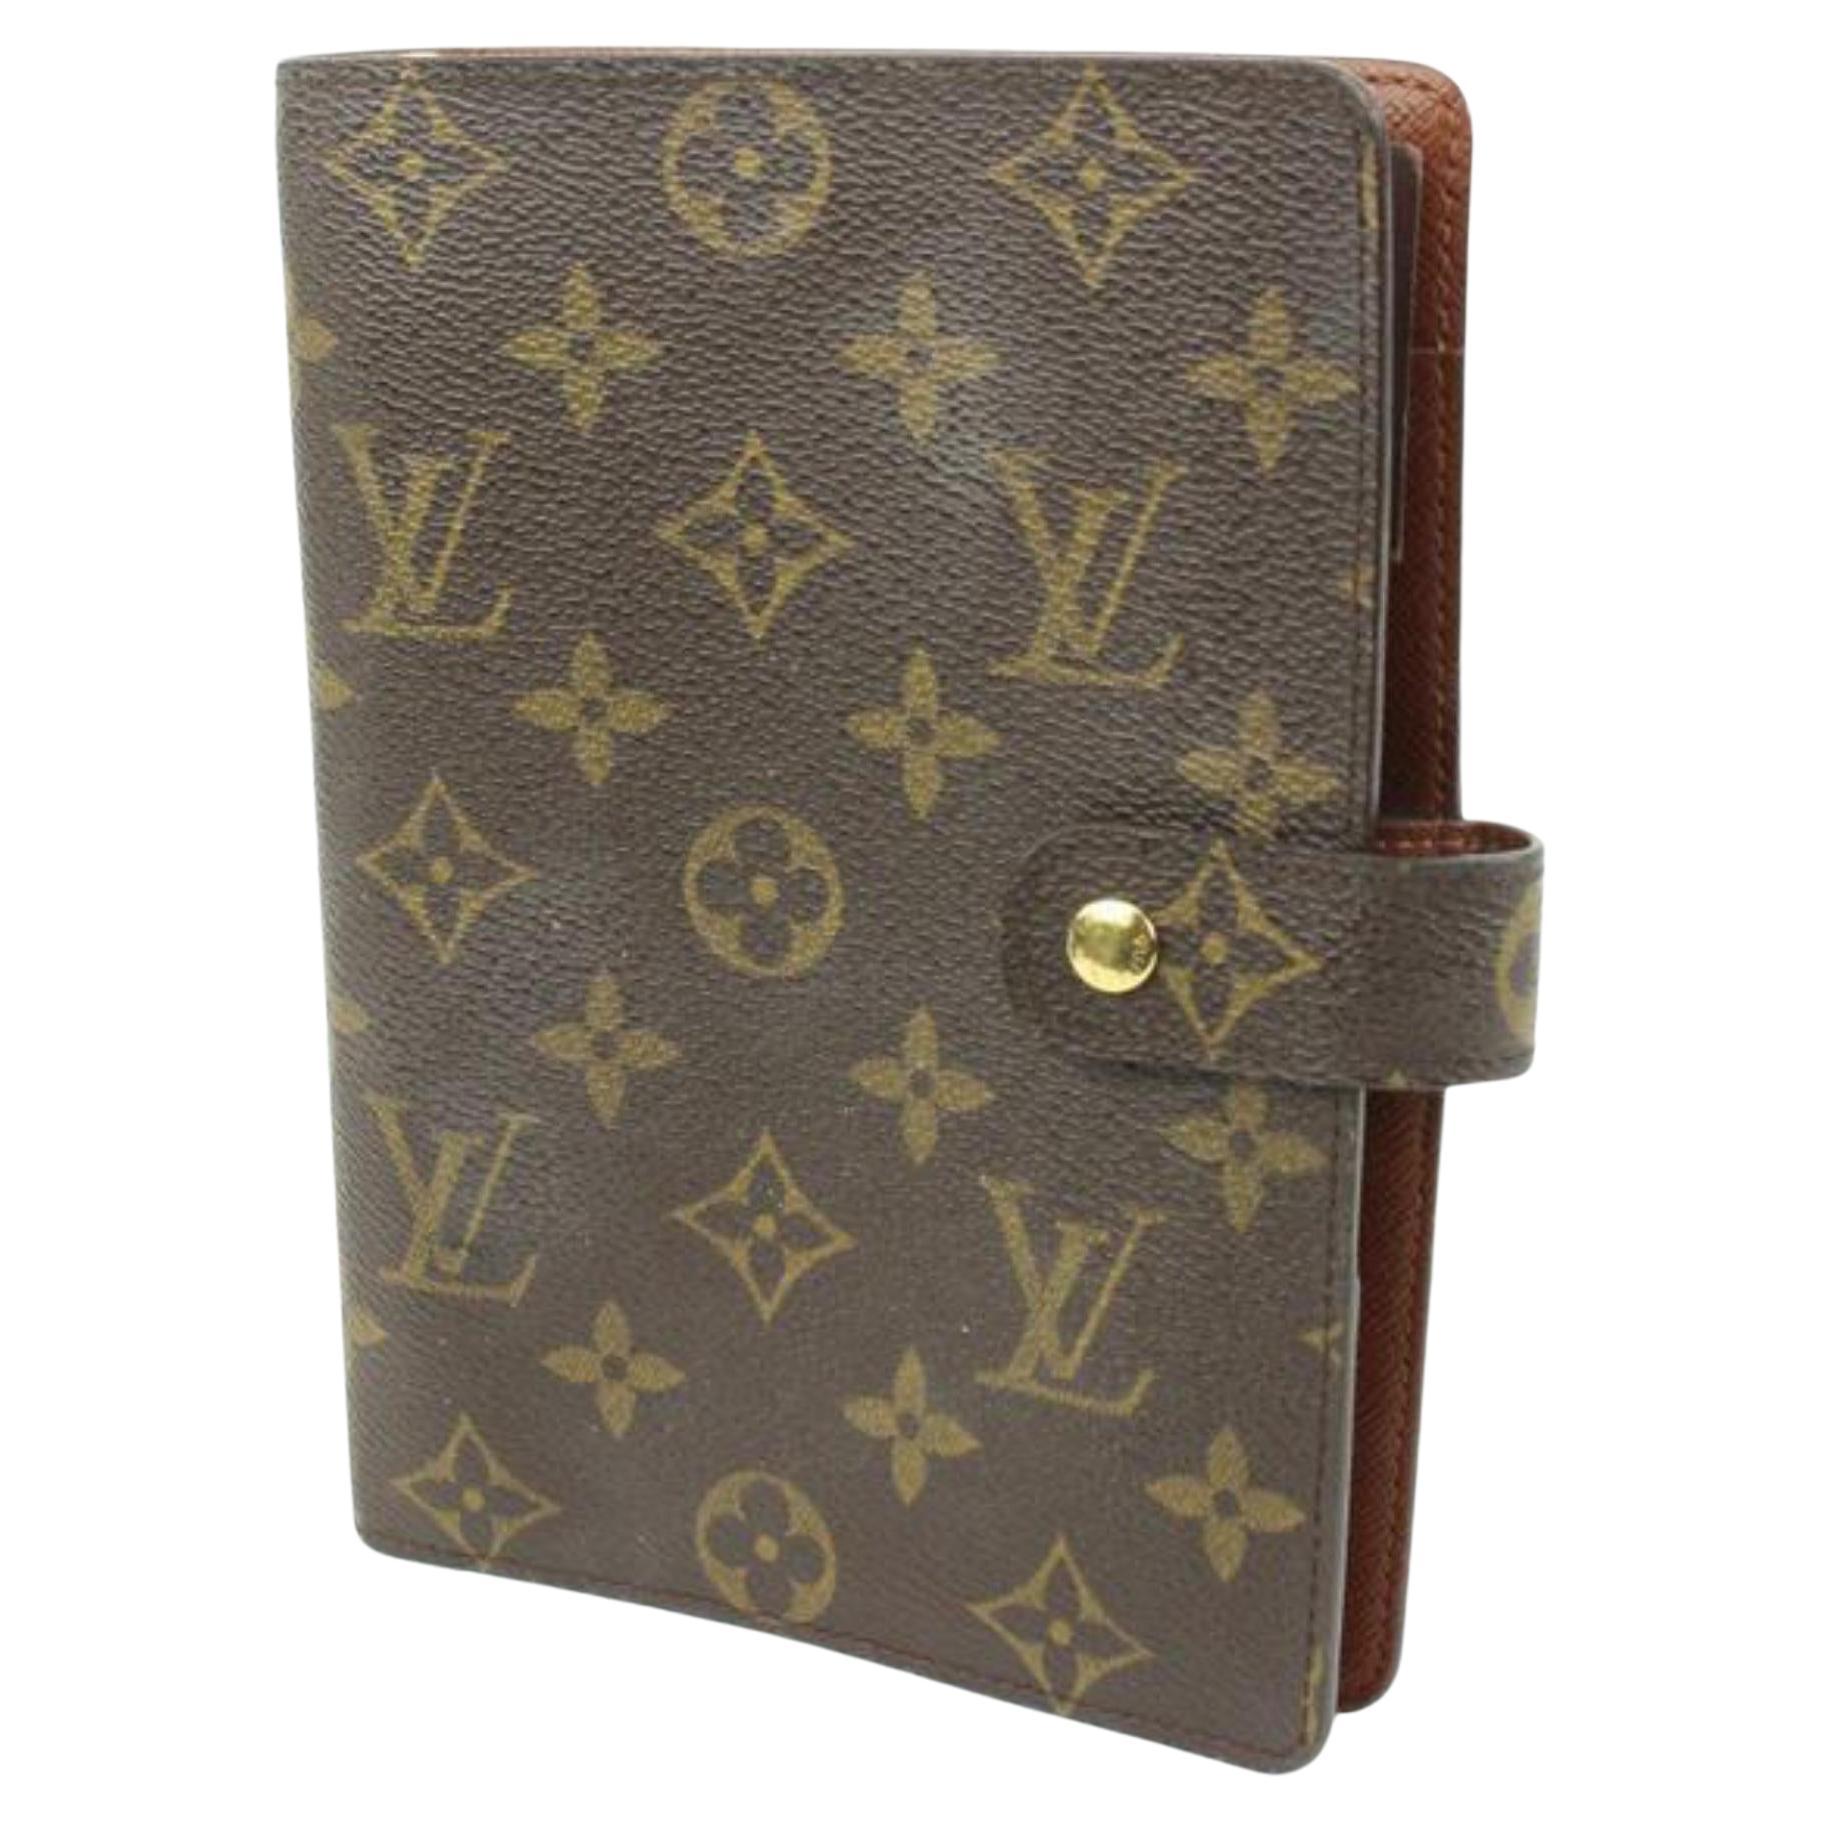 Louis Vuitton Notebook - 11 For Sale on 1stDibs